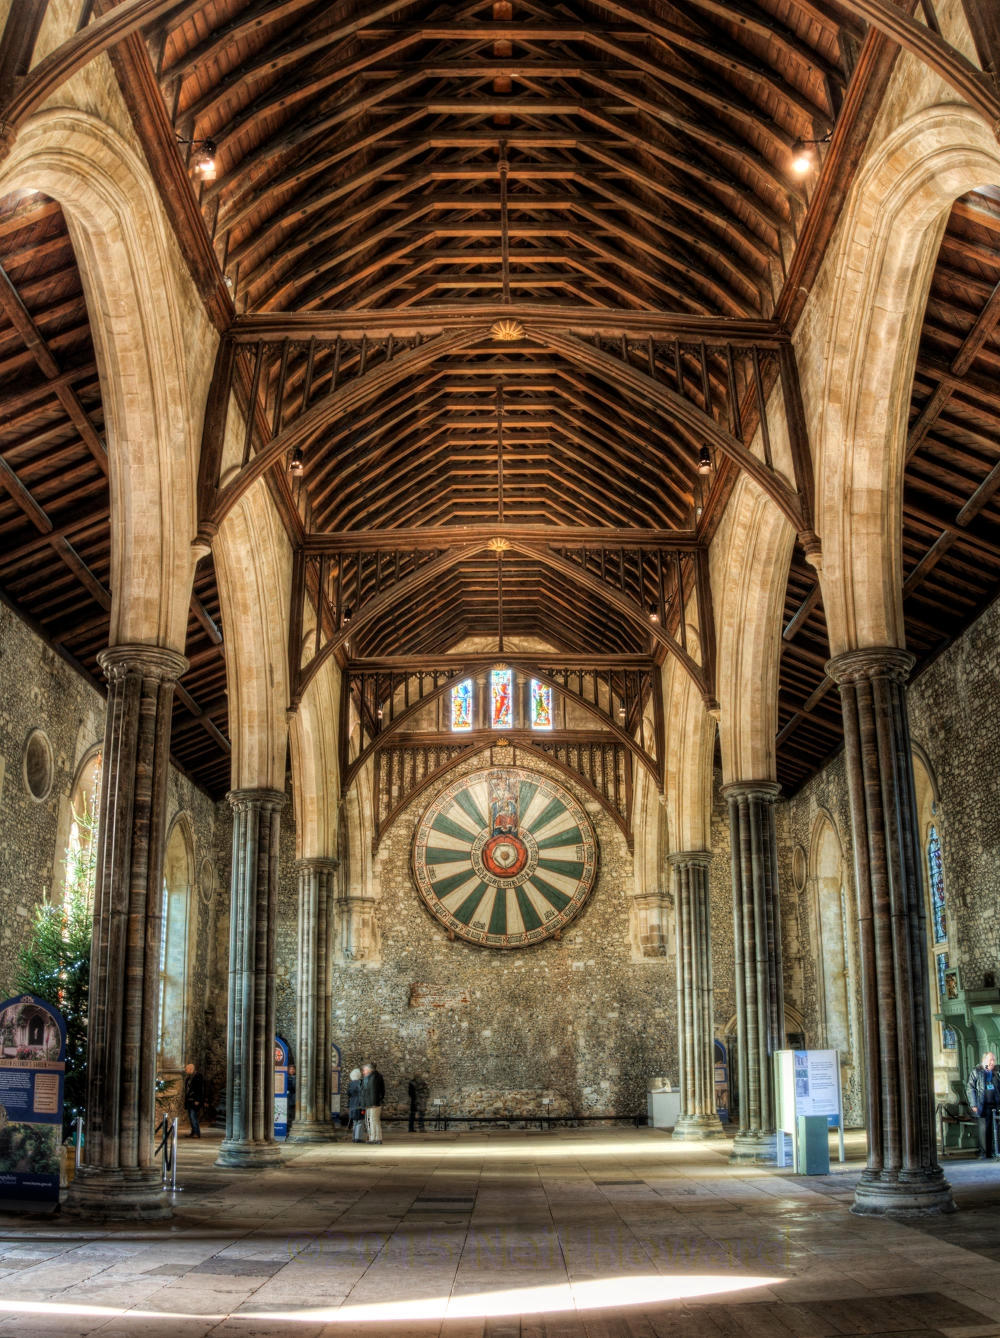 Great Hall, Winchester. Credit Neil Howard, flickr